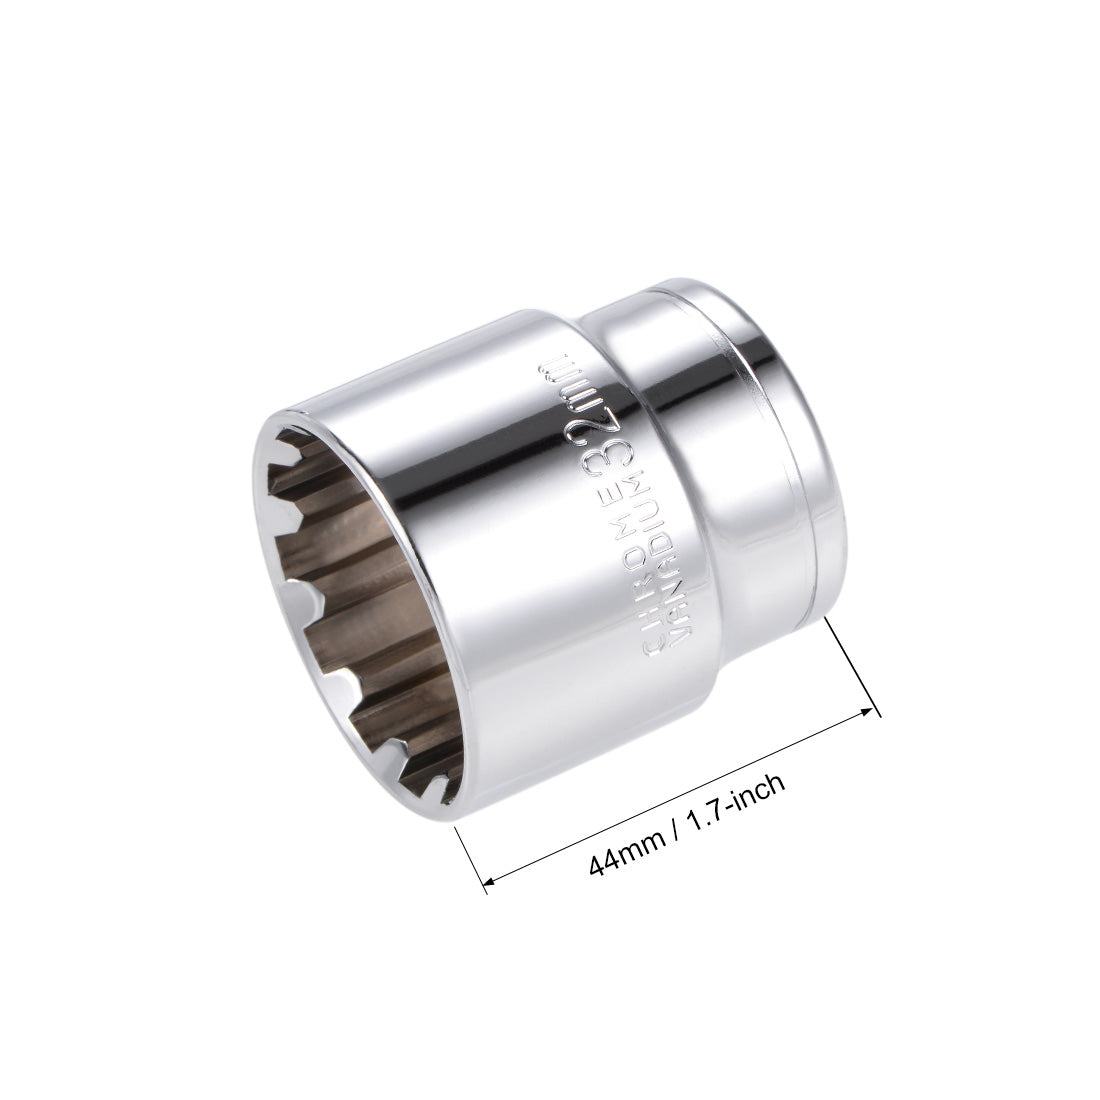 uxcell Uxcell 1/2-inch Drive E32 Universal Spline Socket Shallow 12 Point Cr-V Steel